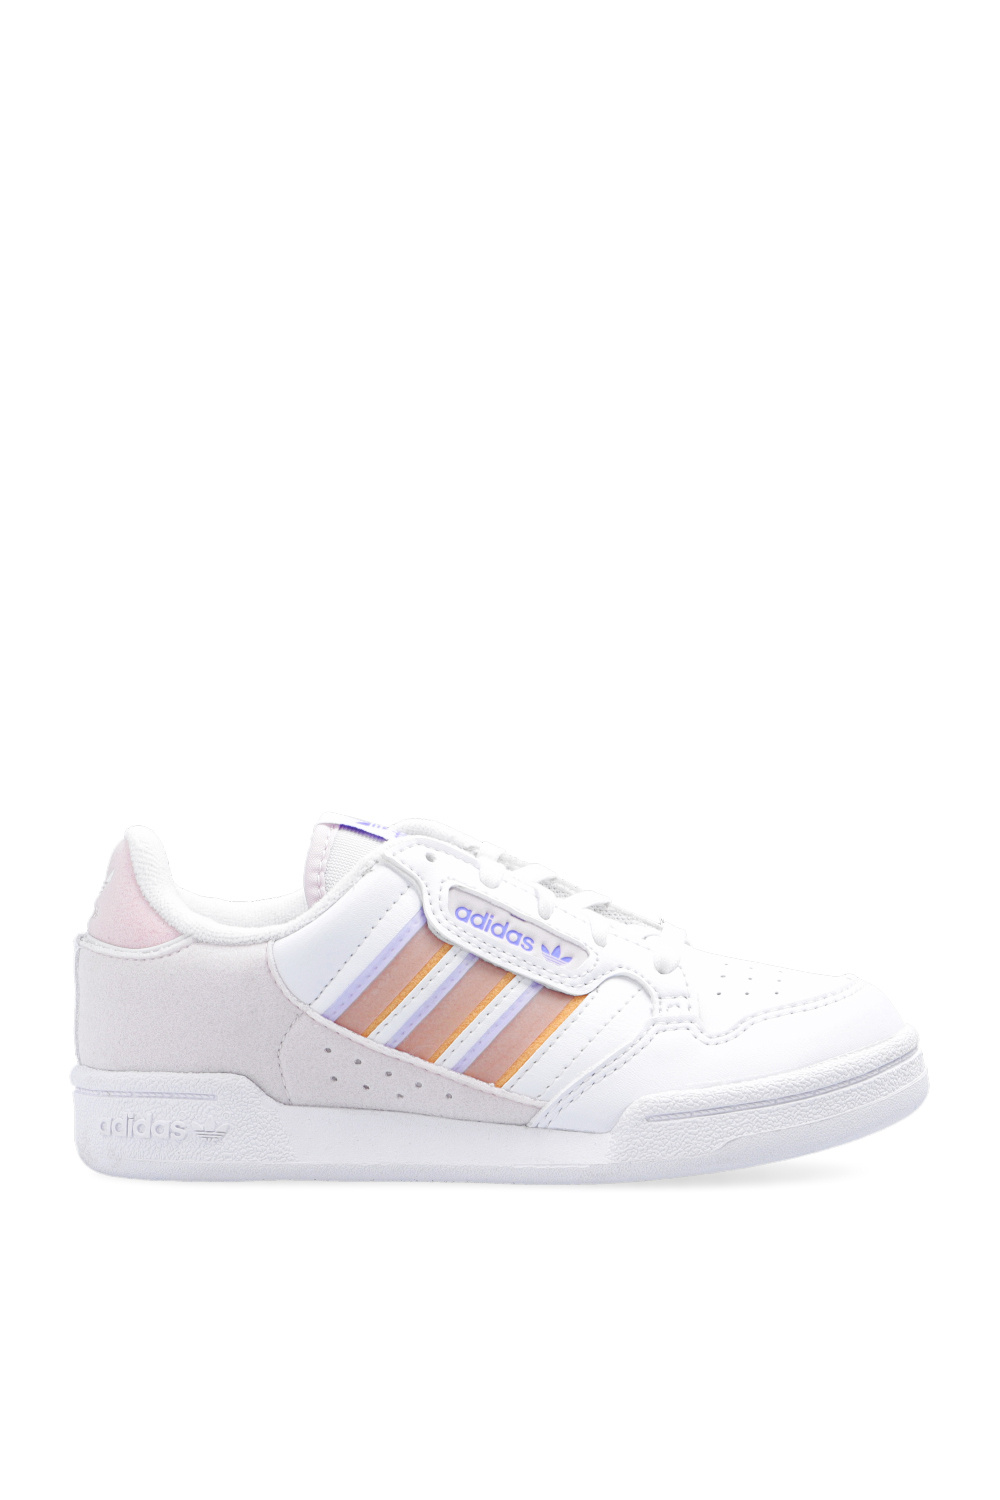 adidas hiangle Kids ‘Continental 80 Stripes C’ sneakers